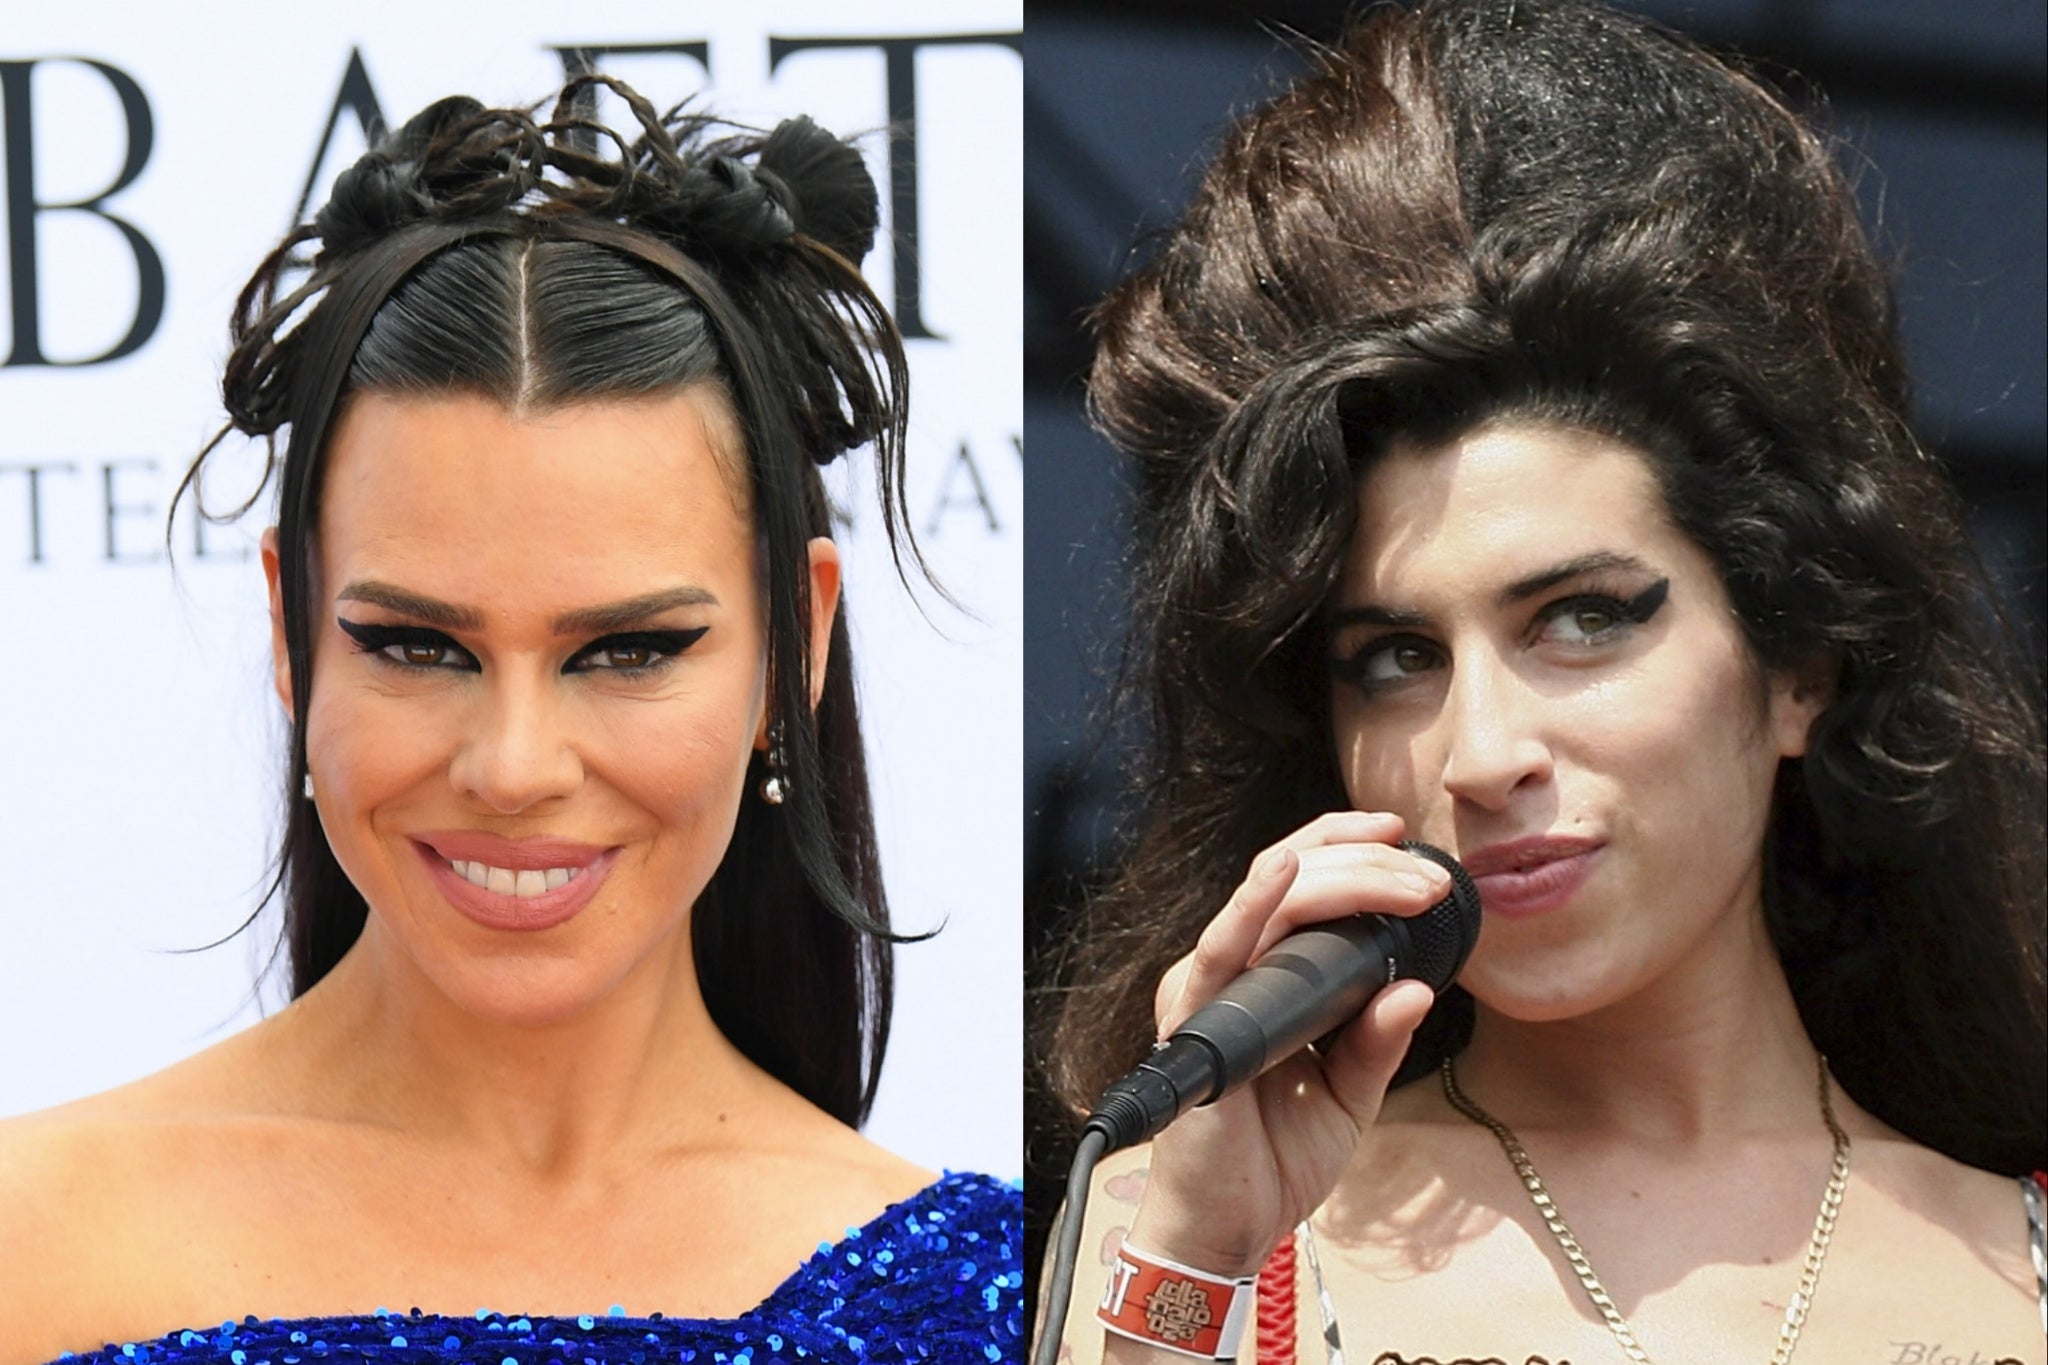 Billie Piper and Amy Winehouse